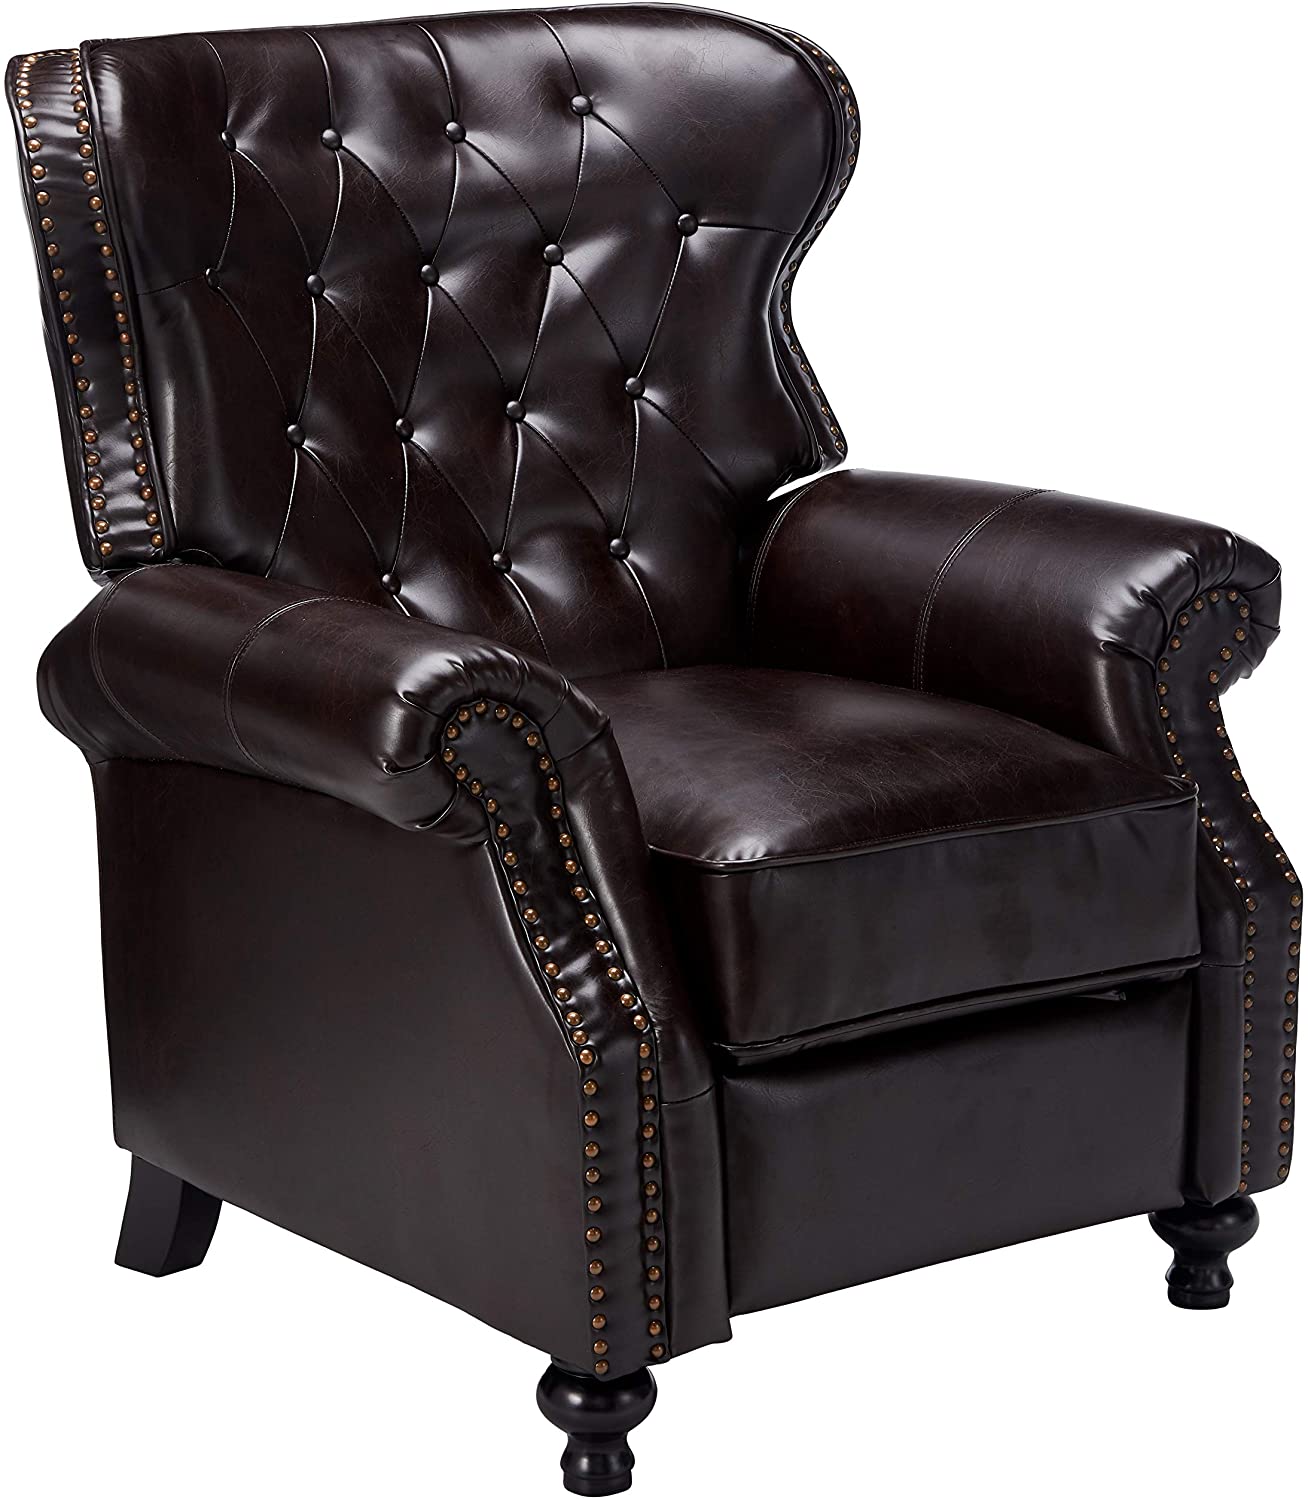 Great Deal Furniture Waldo Brown Leather Recliner Club Chair